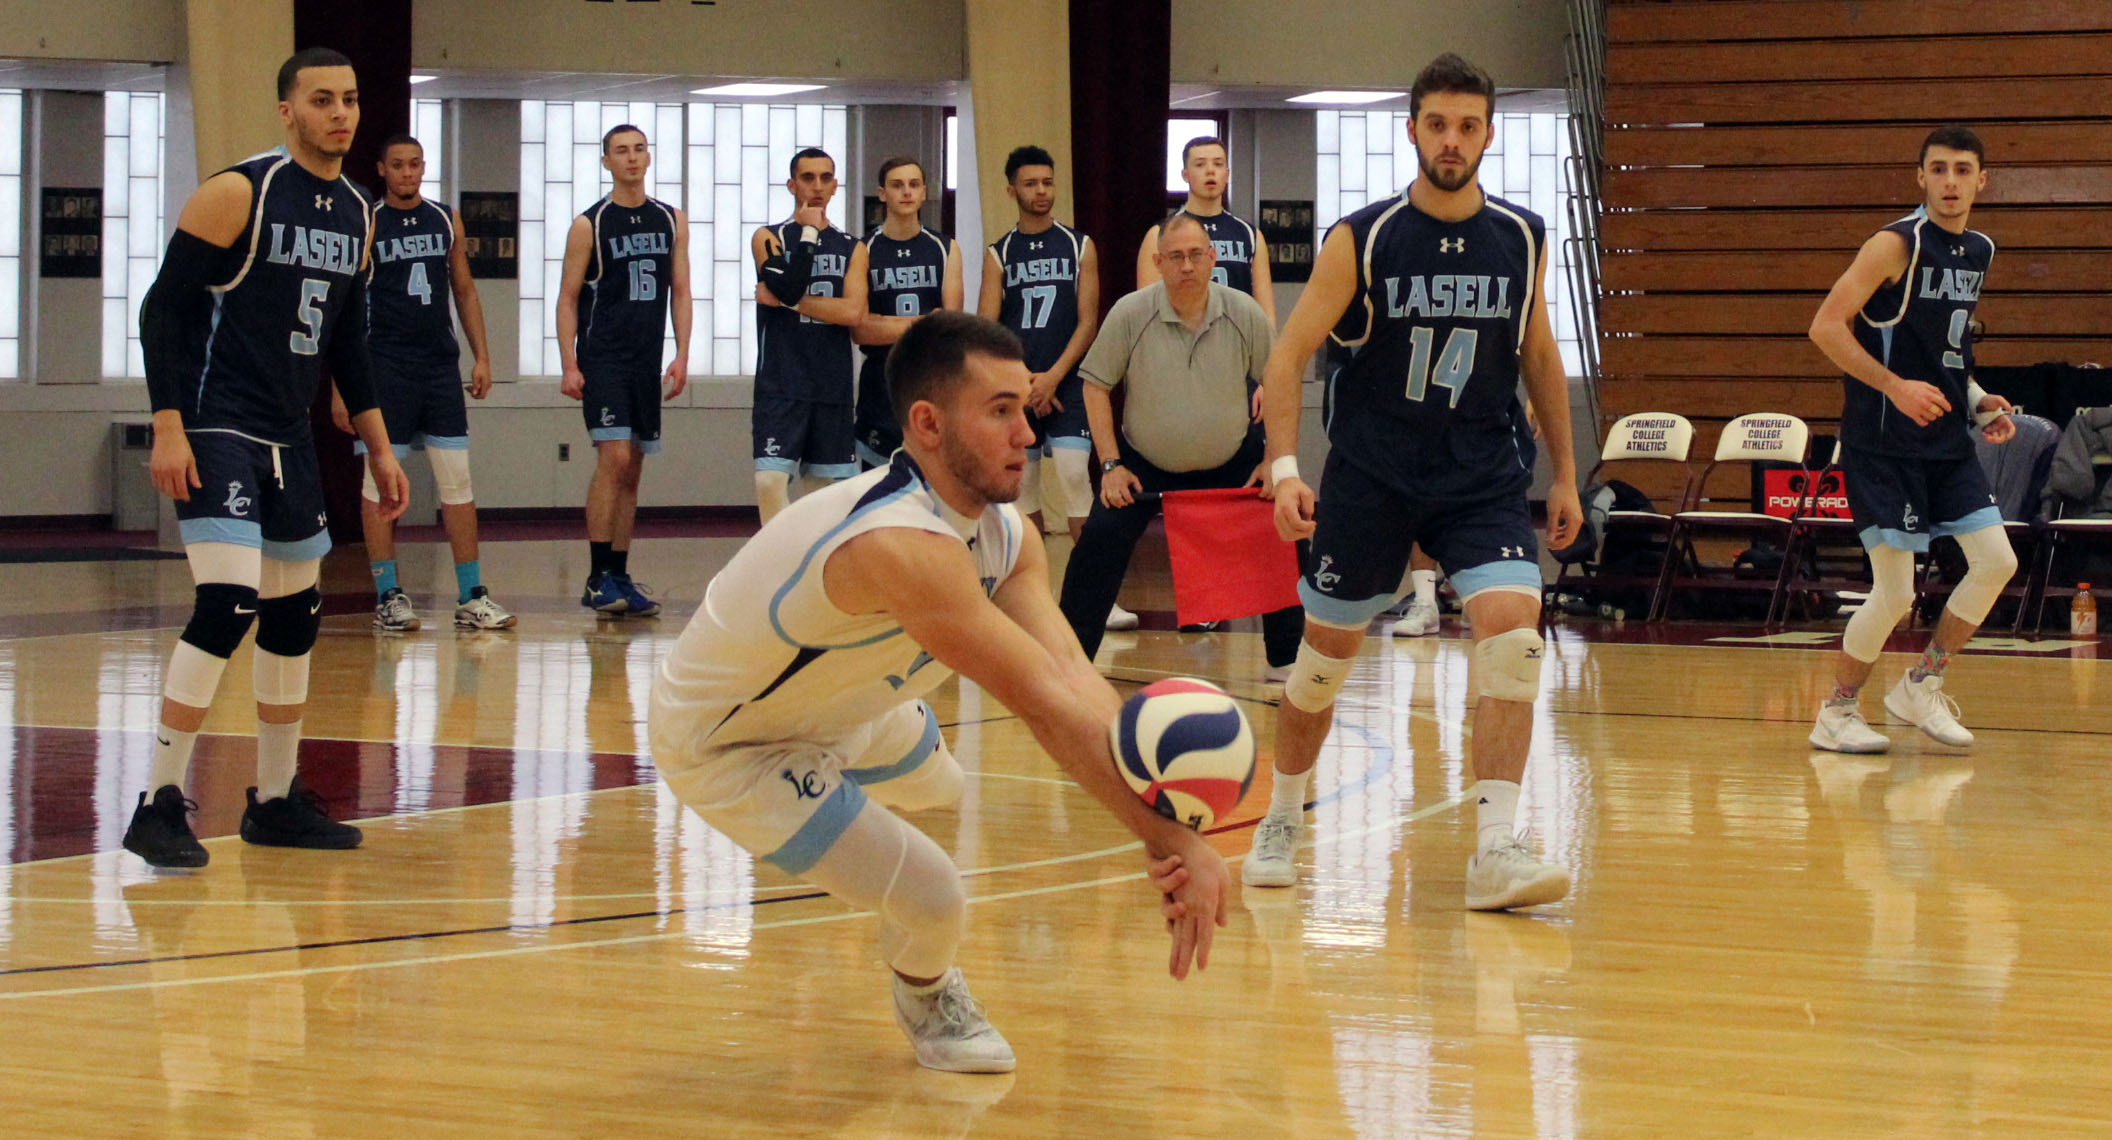 Lasell Men’s Volleyball falls to Endicott